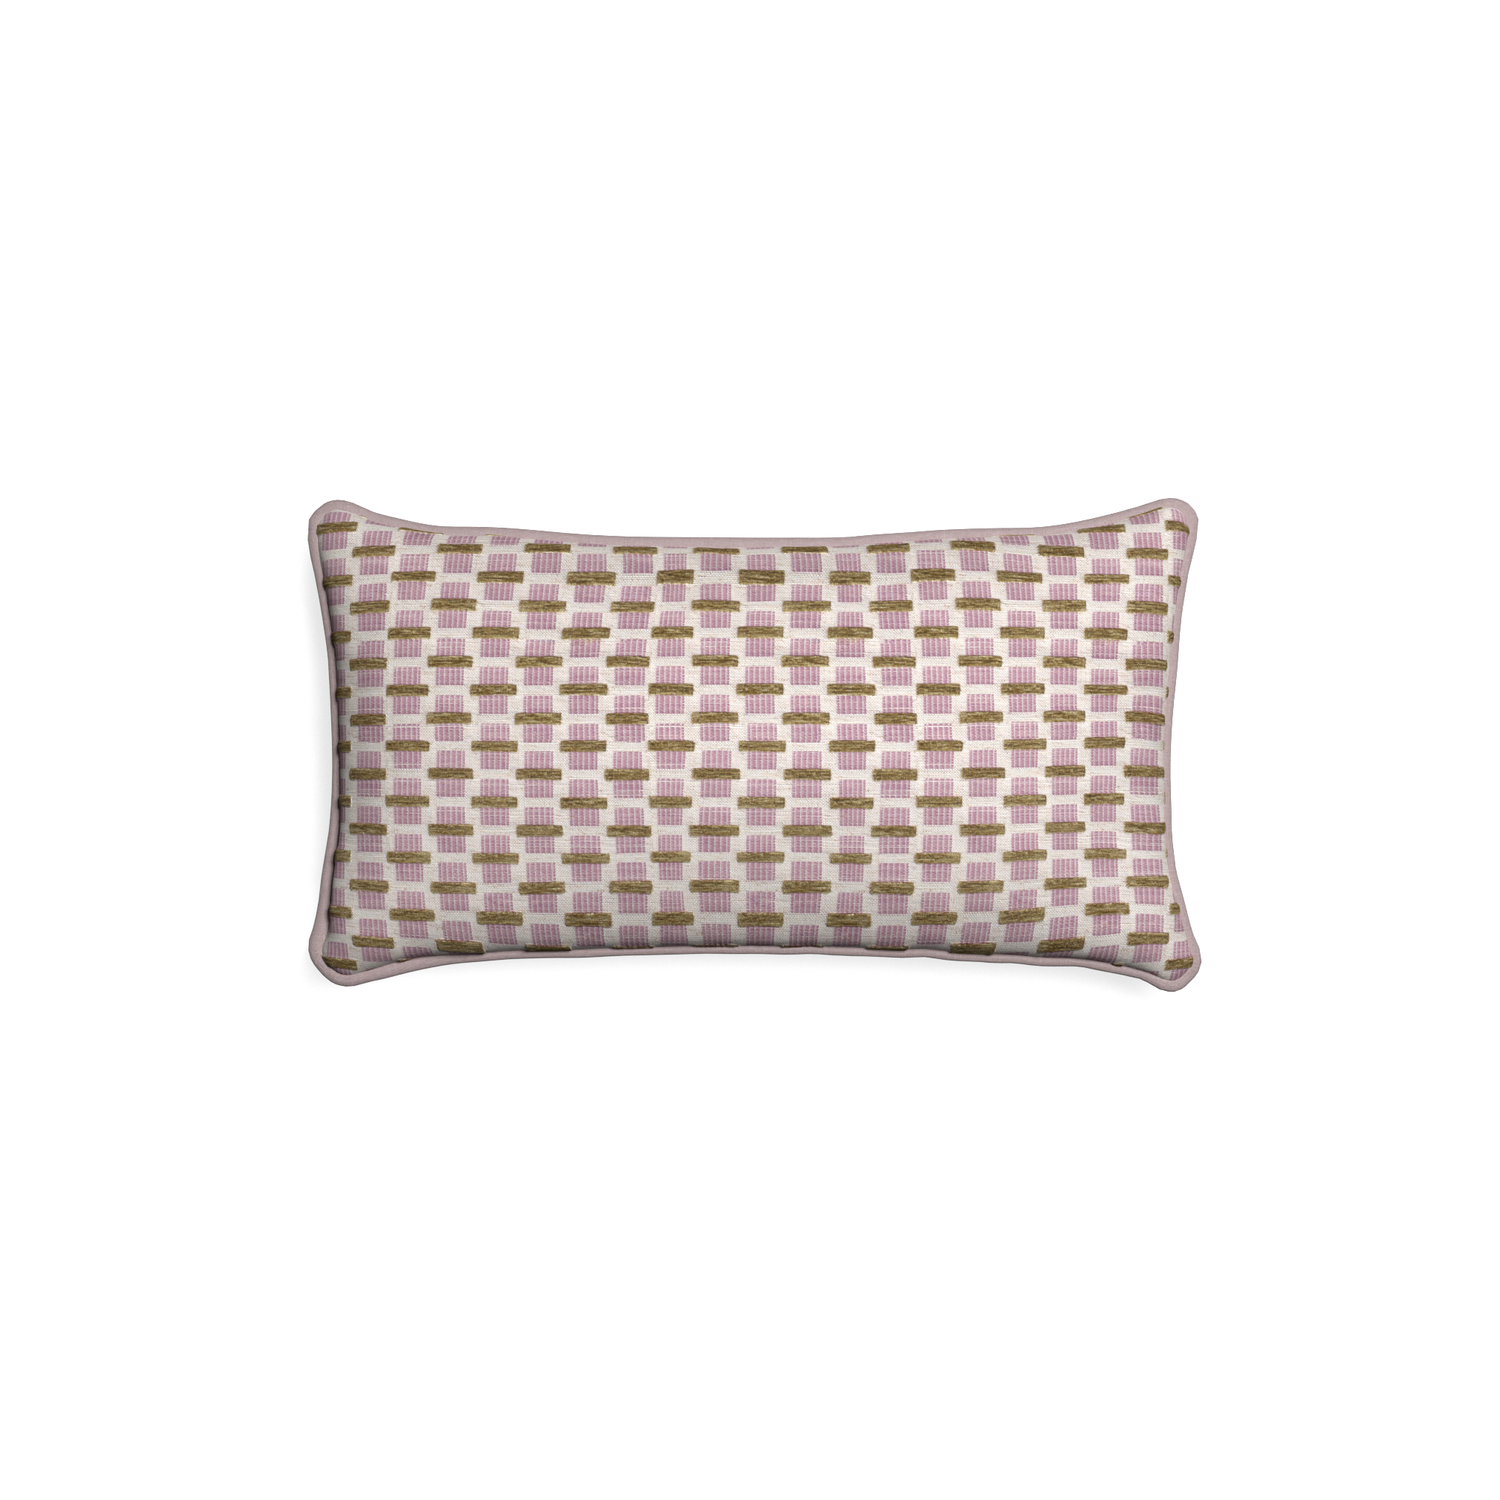 Petite-lumbar willow orchid custom pink geometric chenillepillow with orchid piping on white background